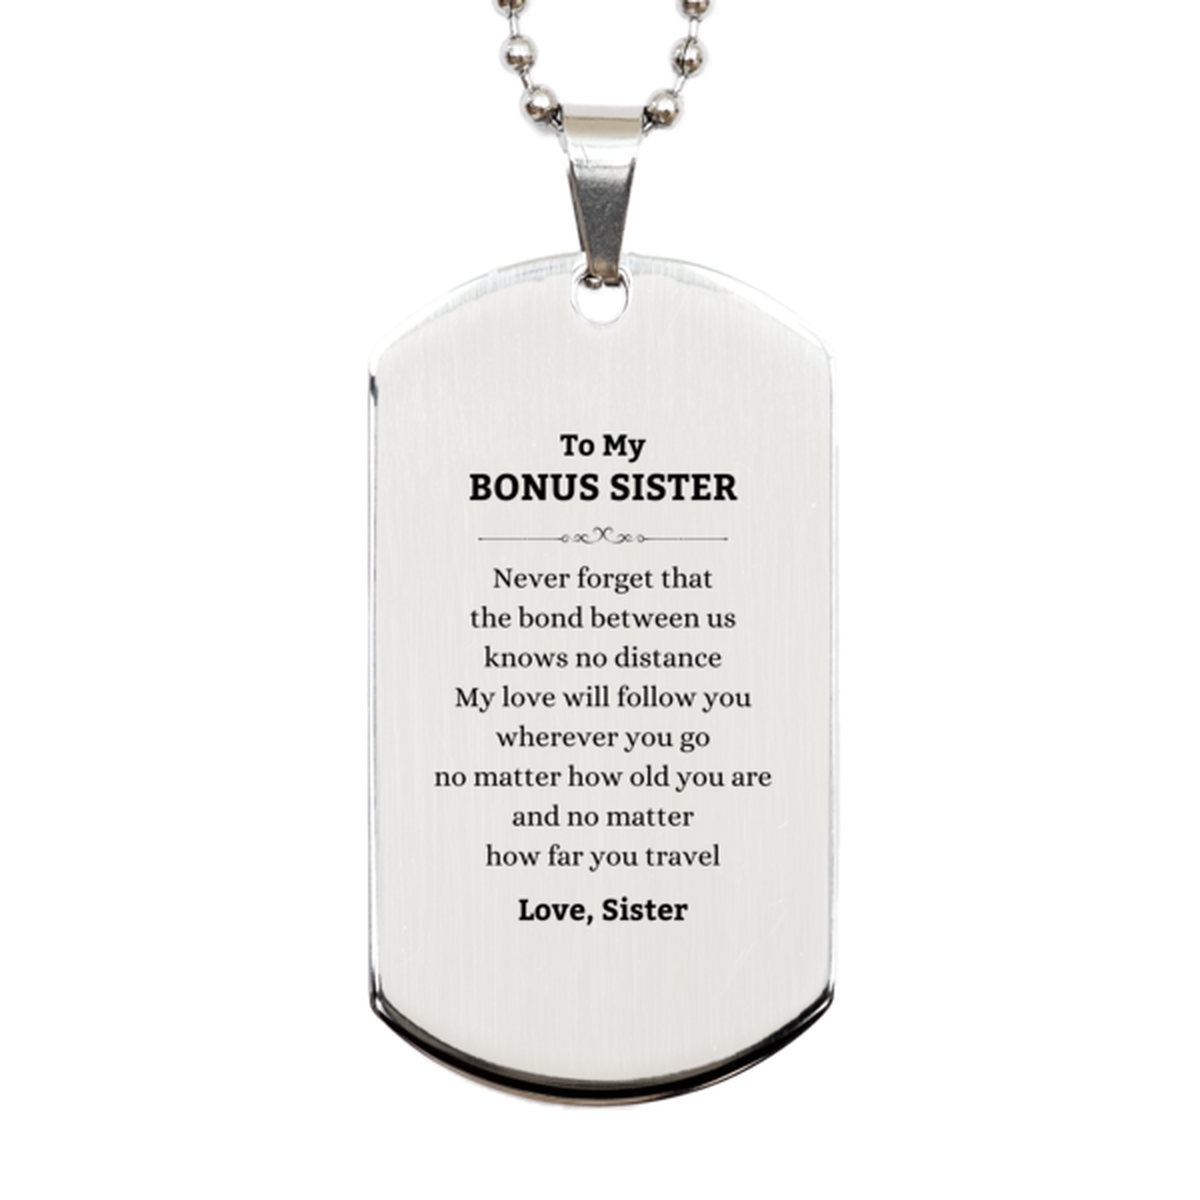 Bonus Sister Birthday Gifts from Sister, Adjustable Silver Dog Tag for Bonus Sister Christmas Graduation Unique Gifts Bonus Sister Never forget that the bond between us knows no distance. Love, Sister